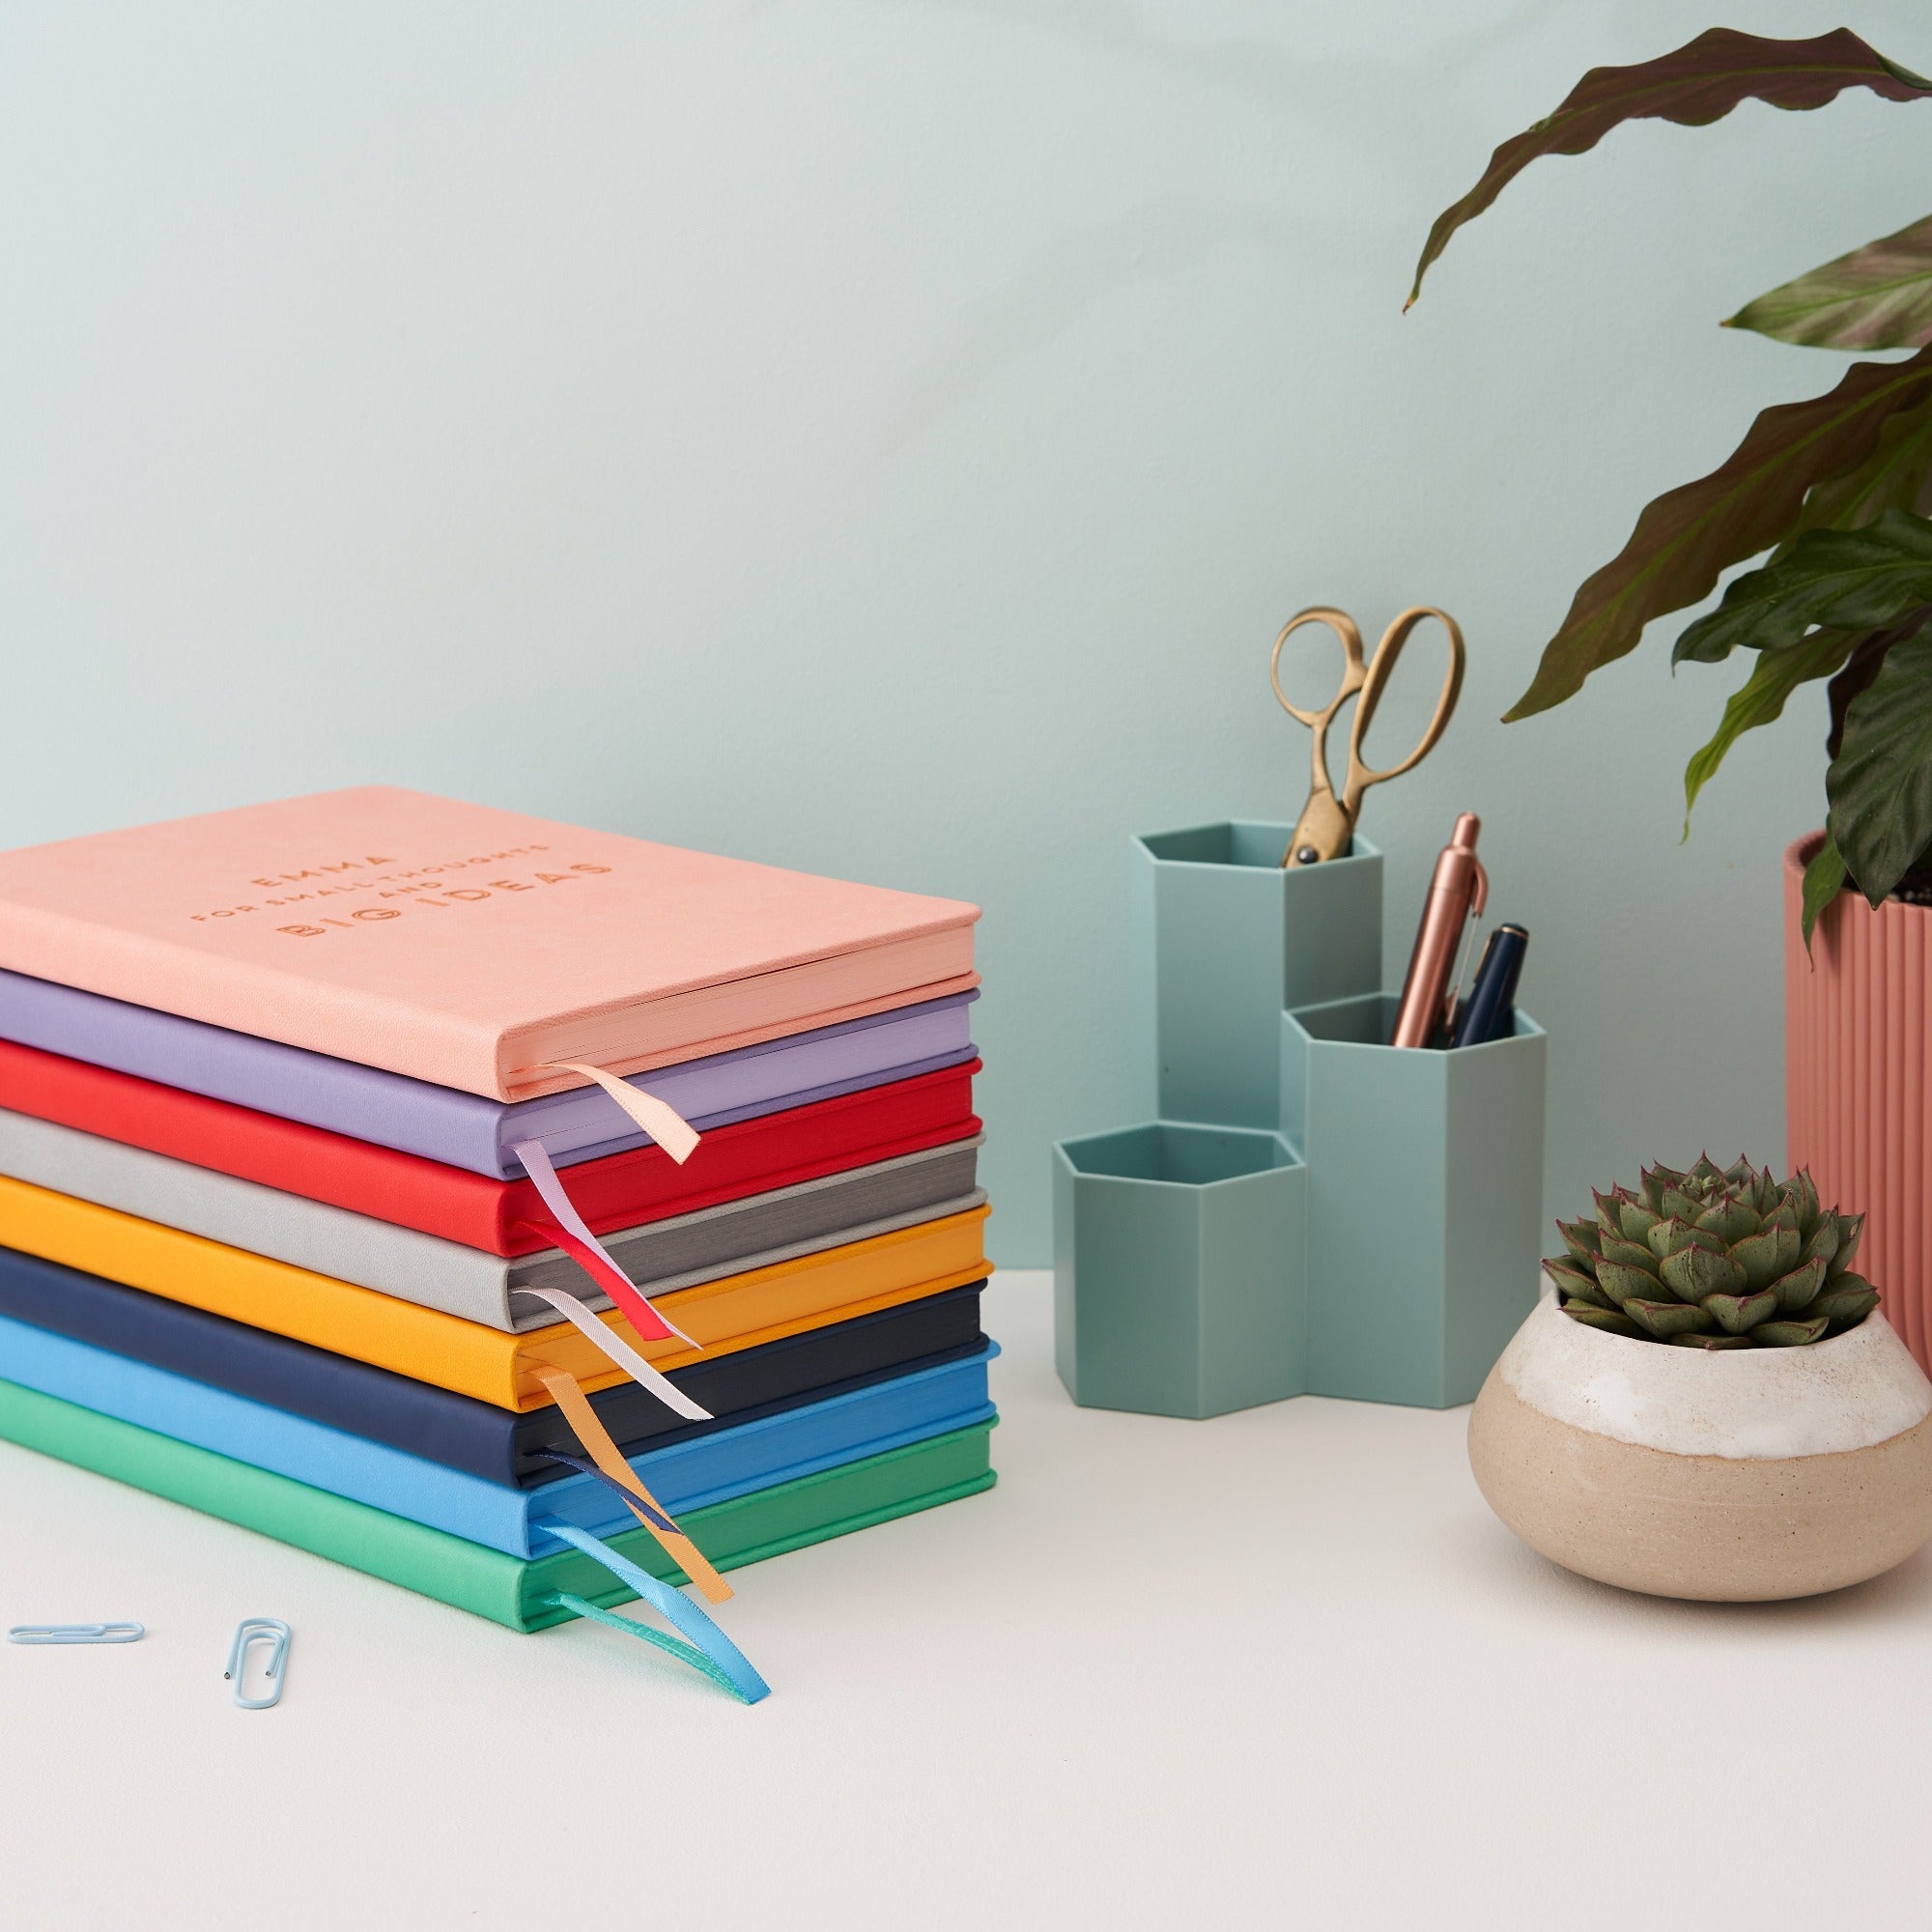 Colourful stack of notebooks showing edges have same colour as front of book